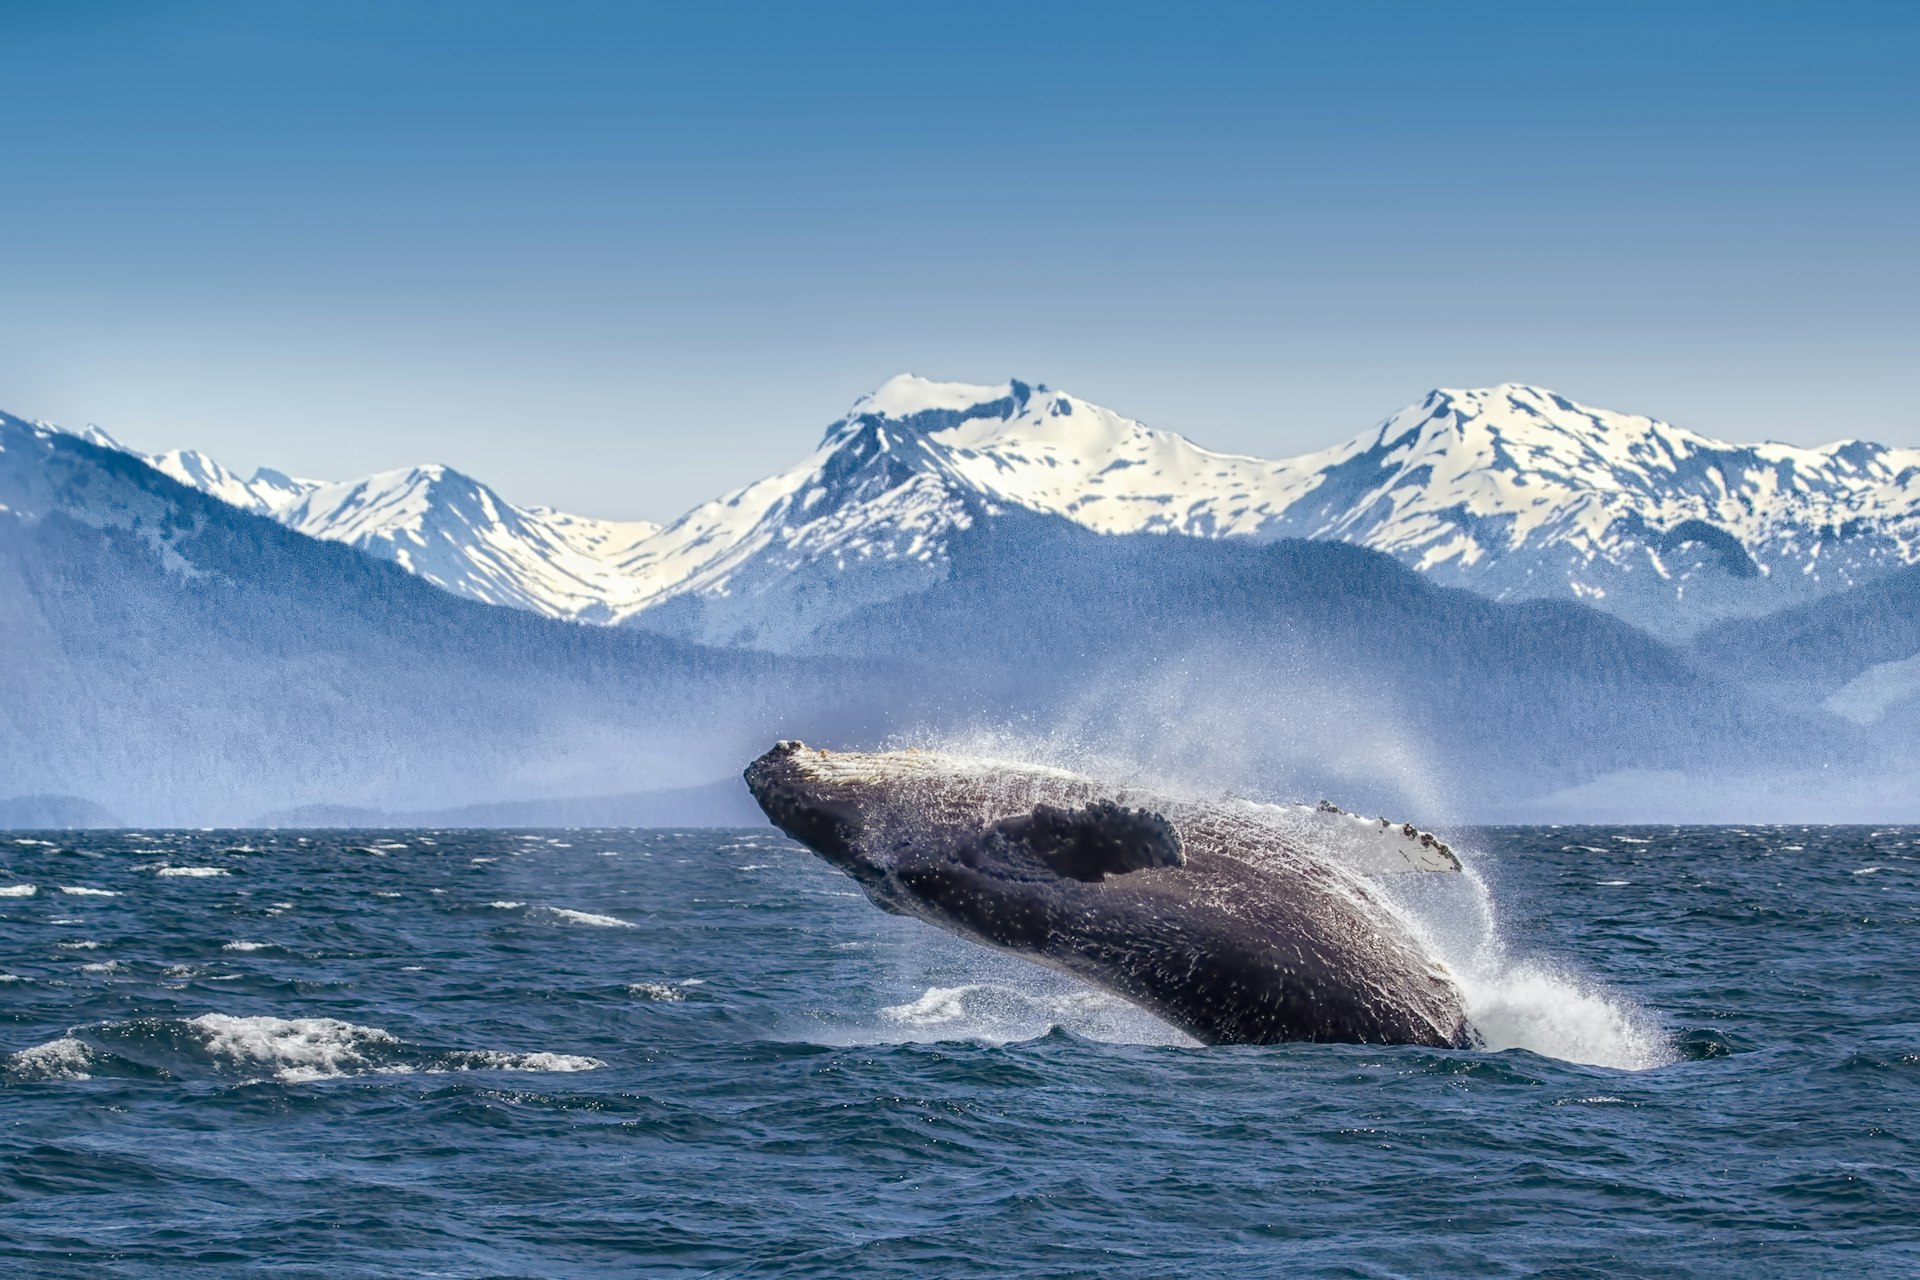 Breaching humpback whale against snow-capped mountains seen in the distance in Glacier Bay, Alaska.